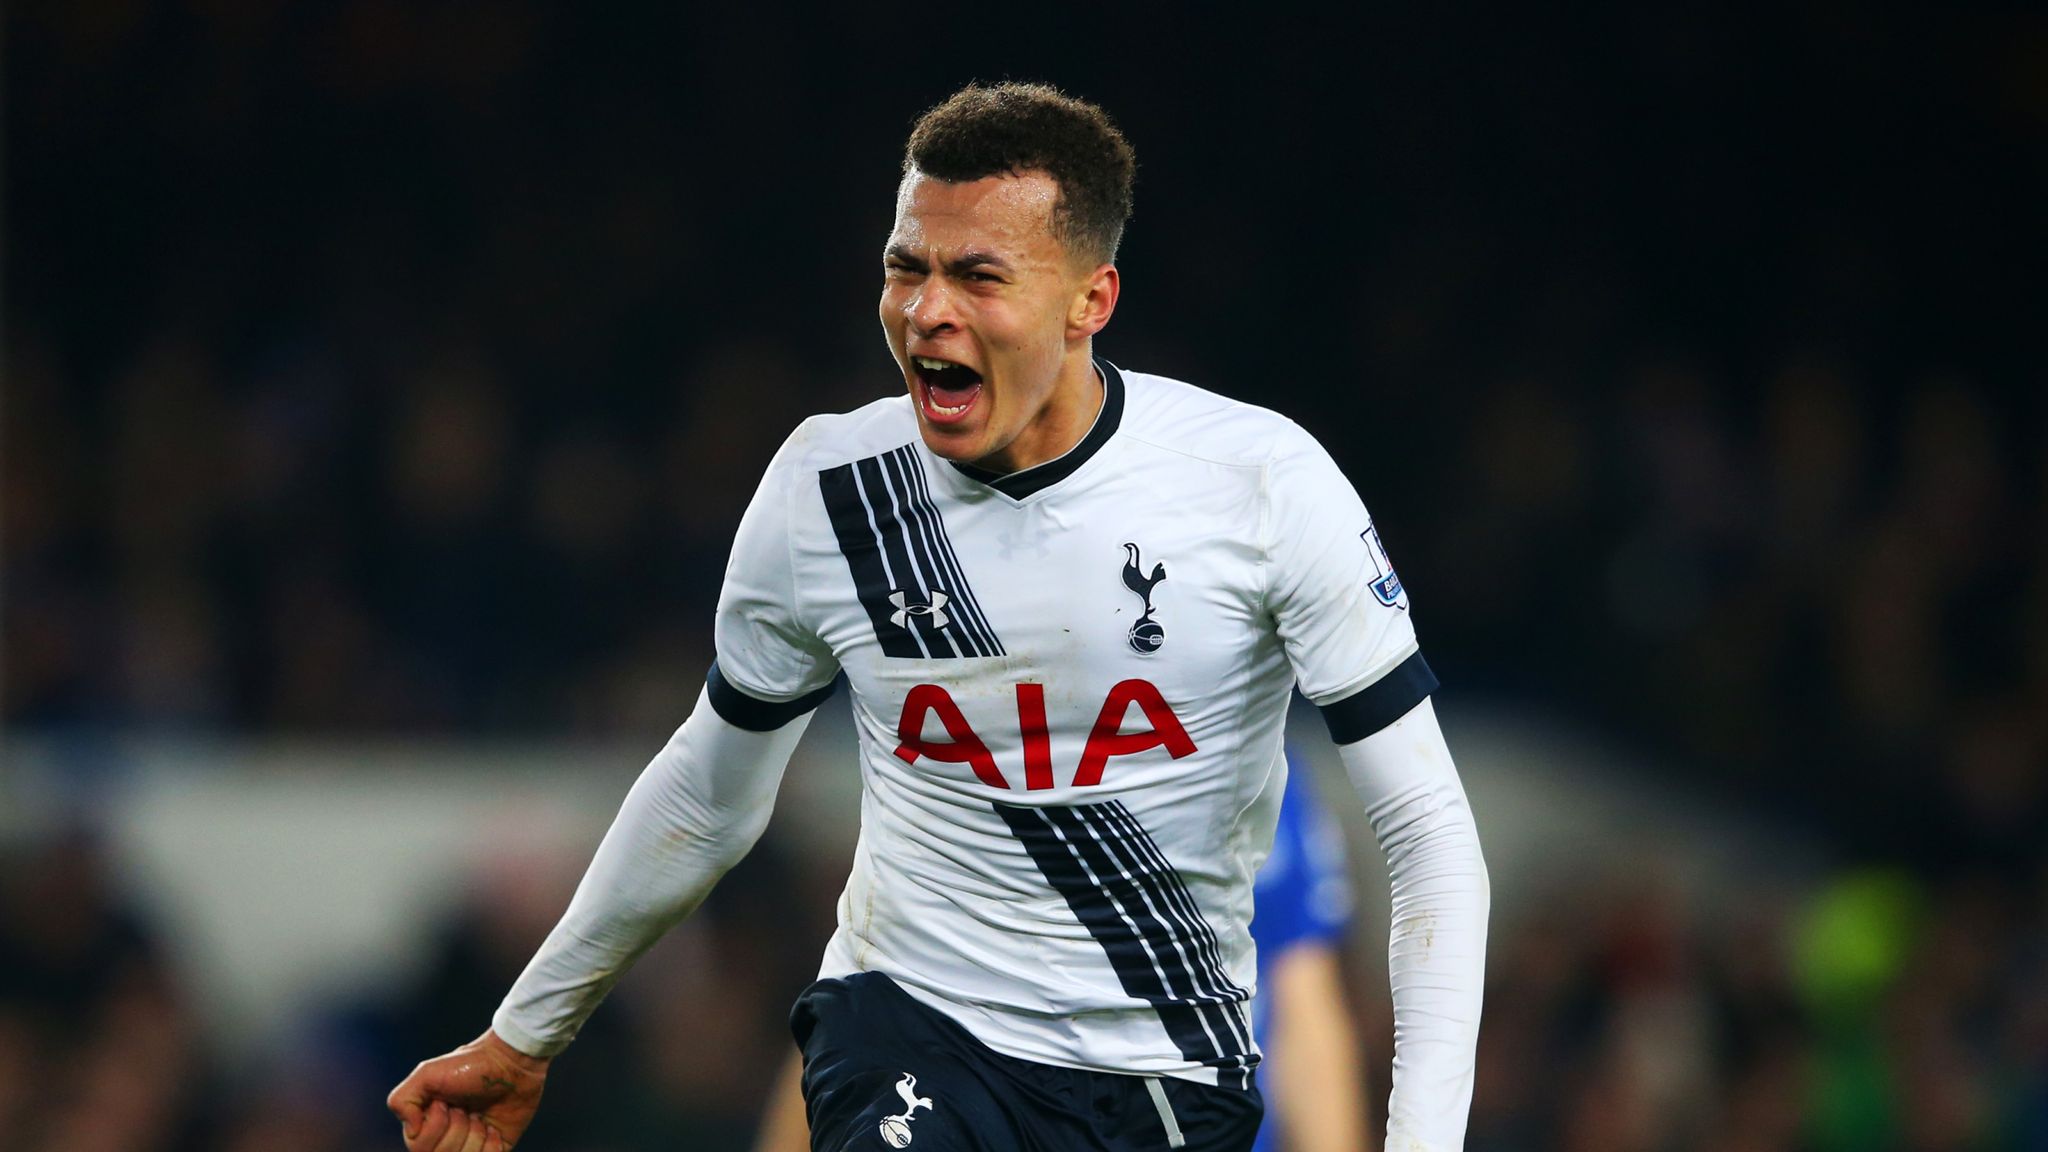 Dele Alli finally finds the freedom to make his mark on world